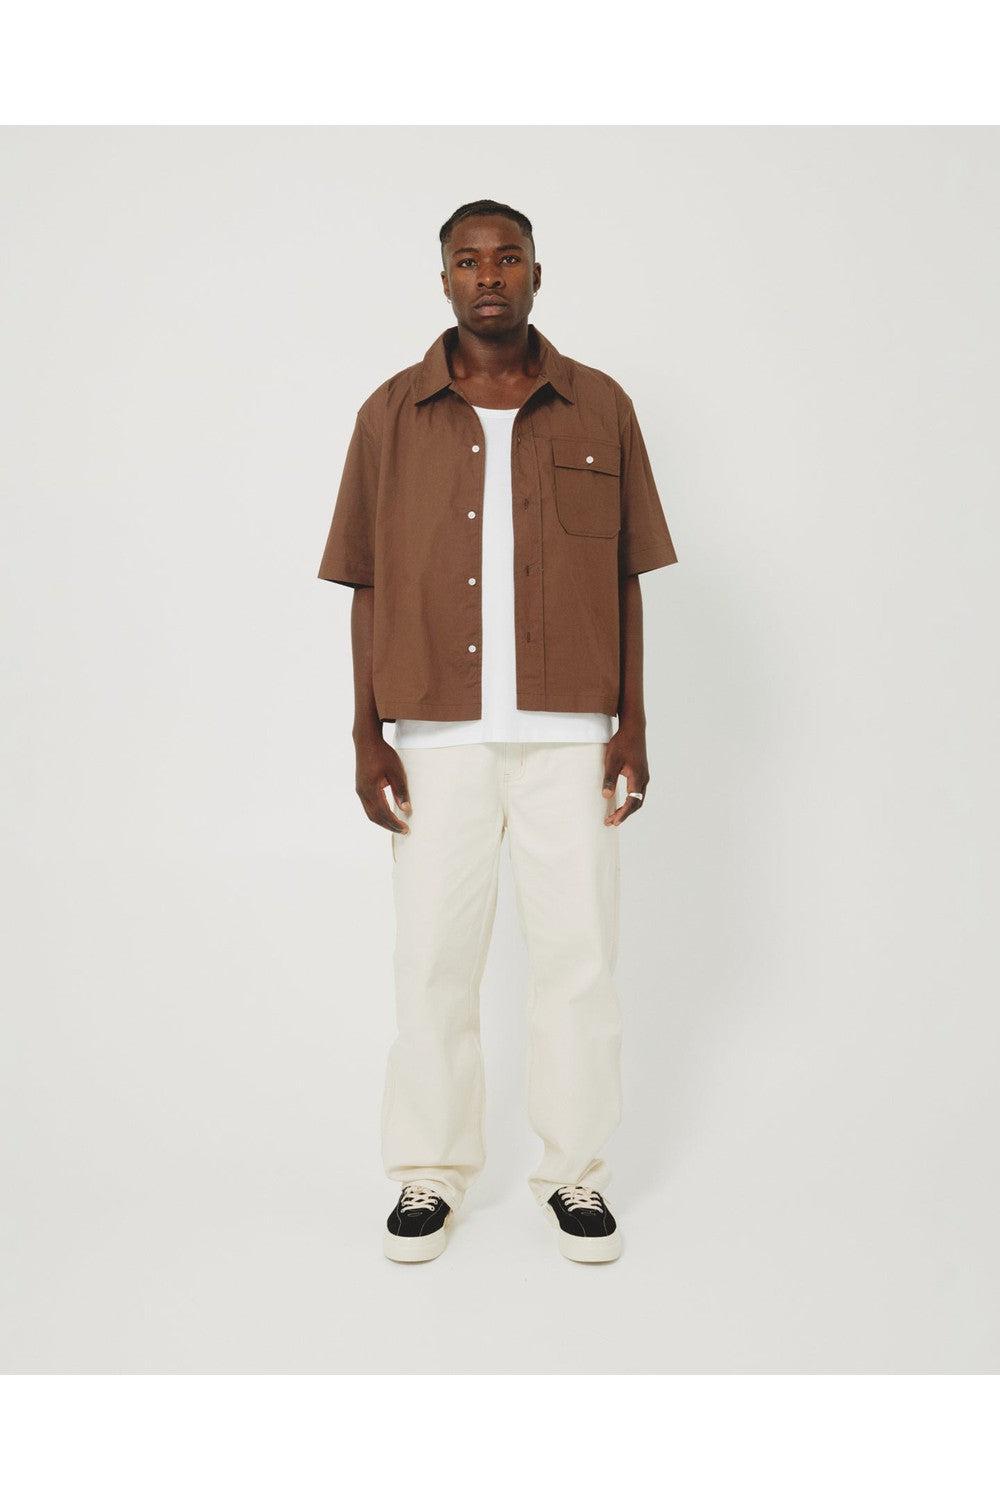 BOX FIT SHIRT / COCOA | COMMONERS | Mad About The Boy